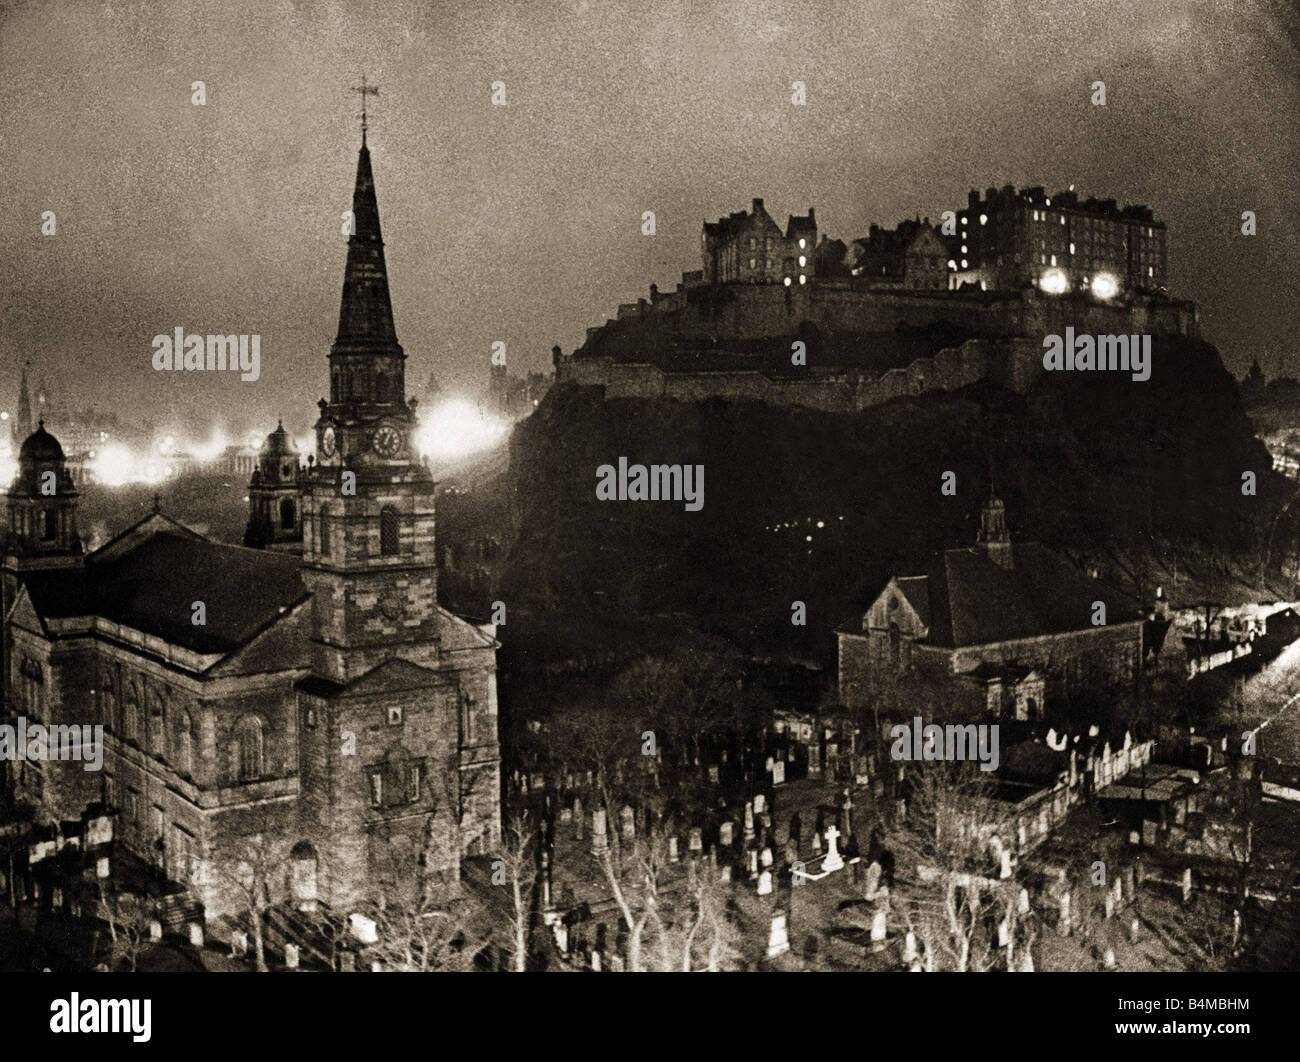 Edinburgh Castle Palace Prison and fortress It s so old that it s foundations go back to antiquity standing in it s shadows is a church and a graveyard Scenic eerie Atmospheric Night Circa 1940s Stock Photo